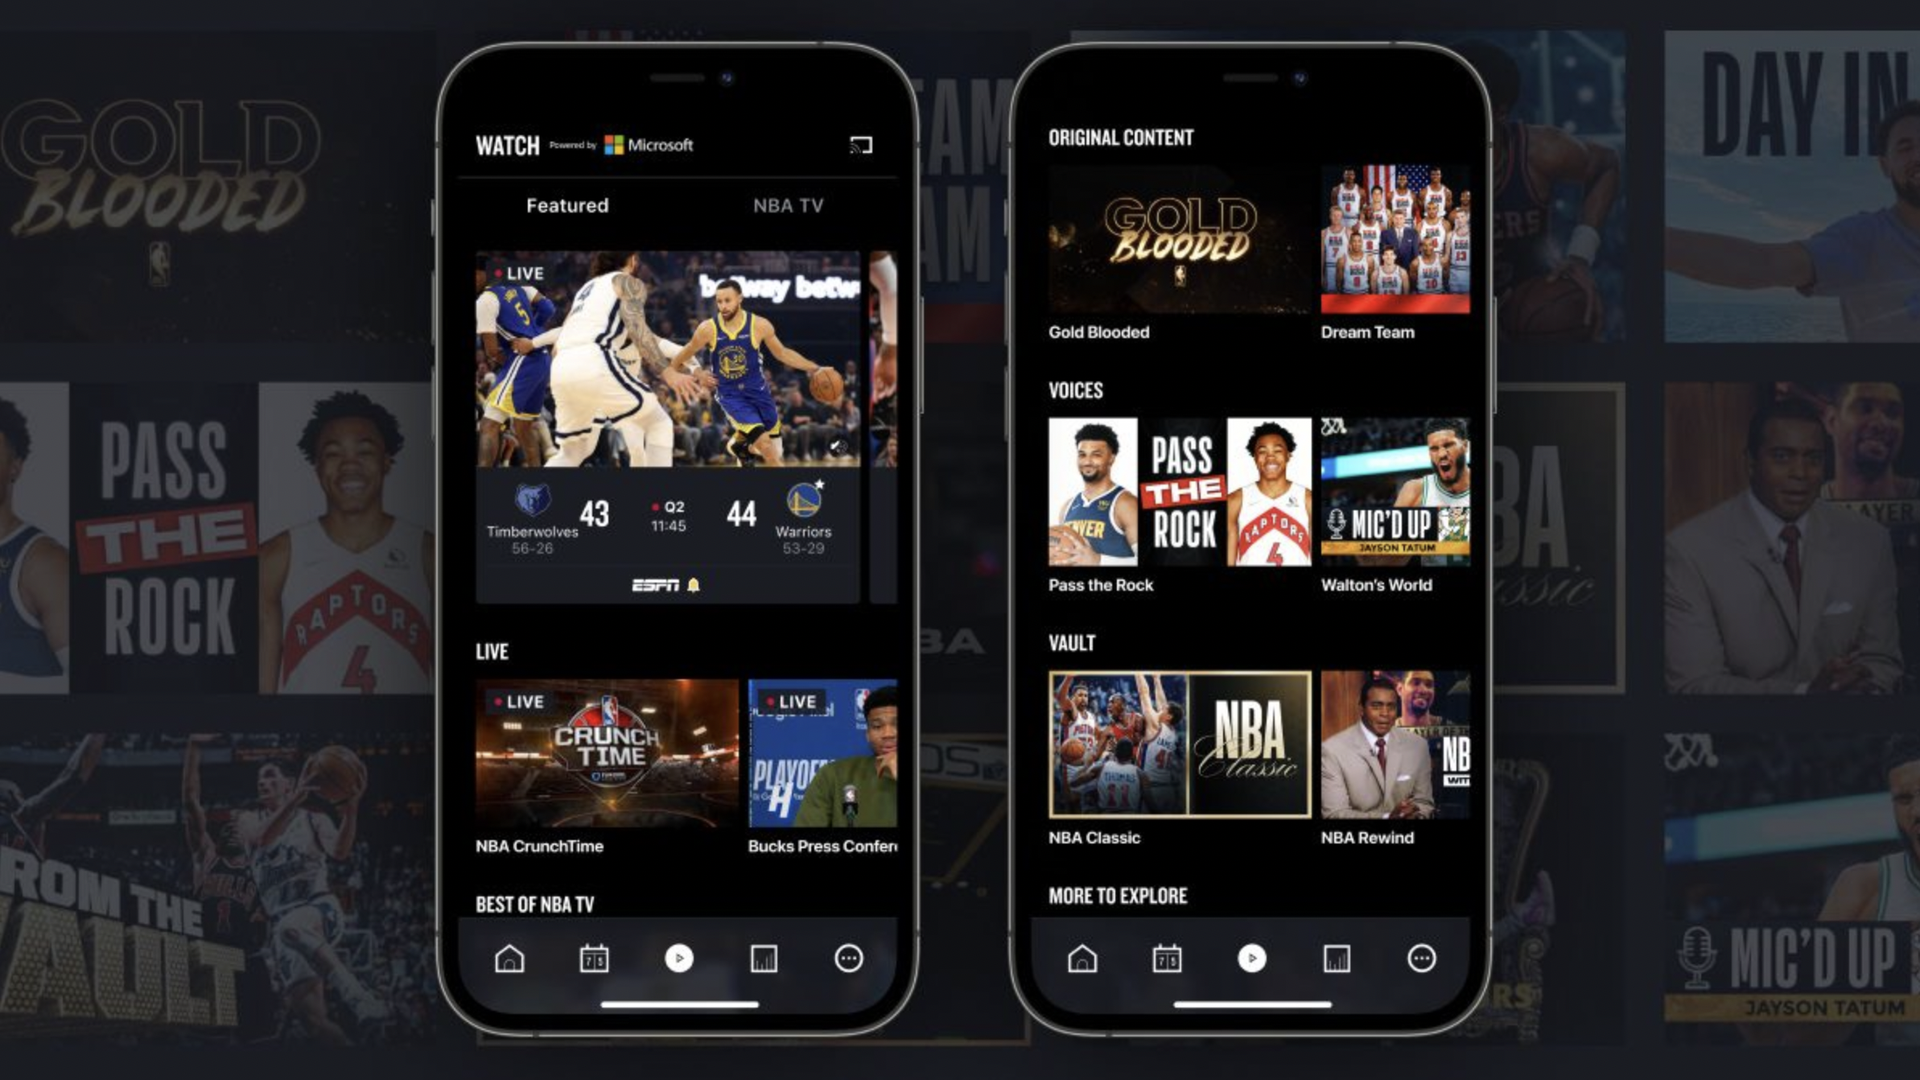 Screenshots from the revamped NBA app